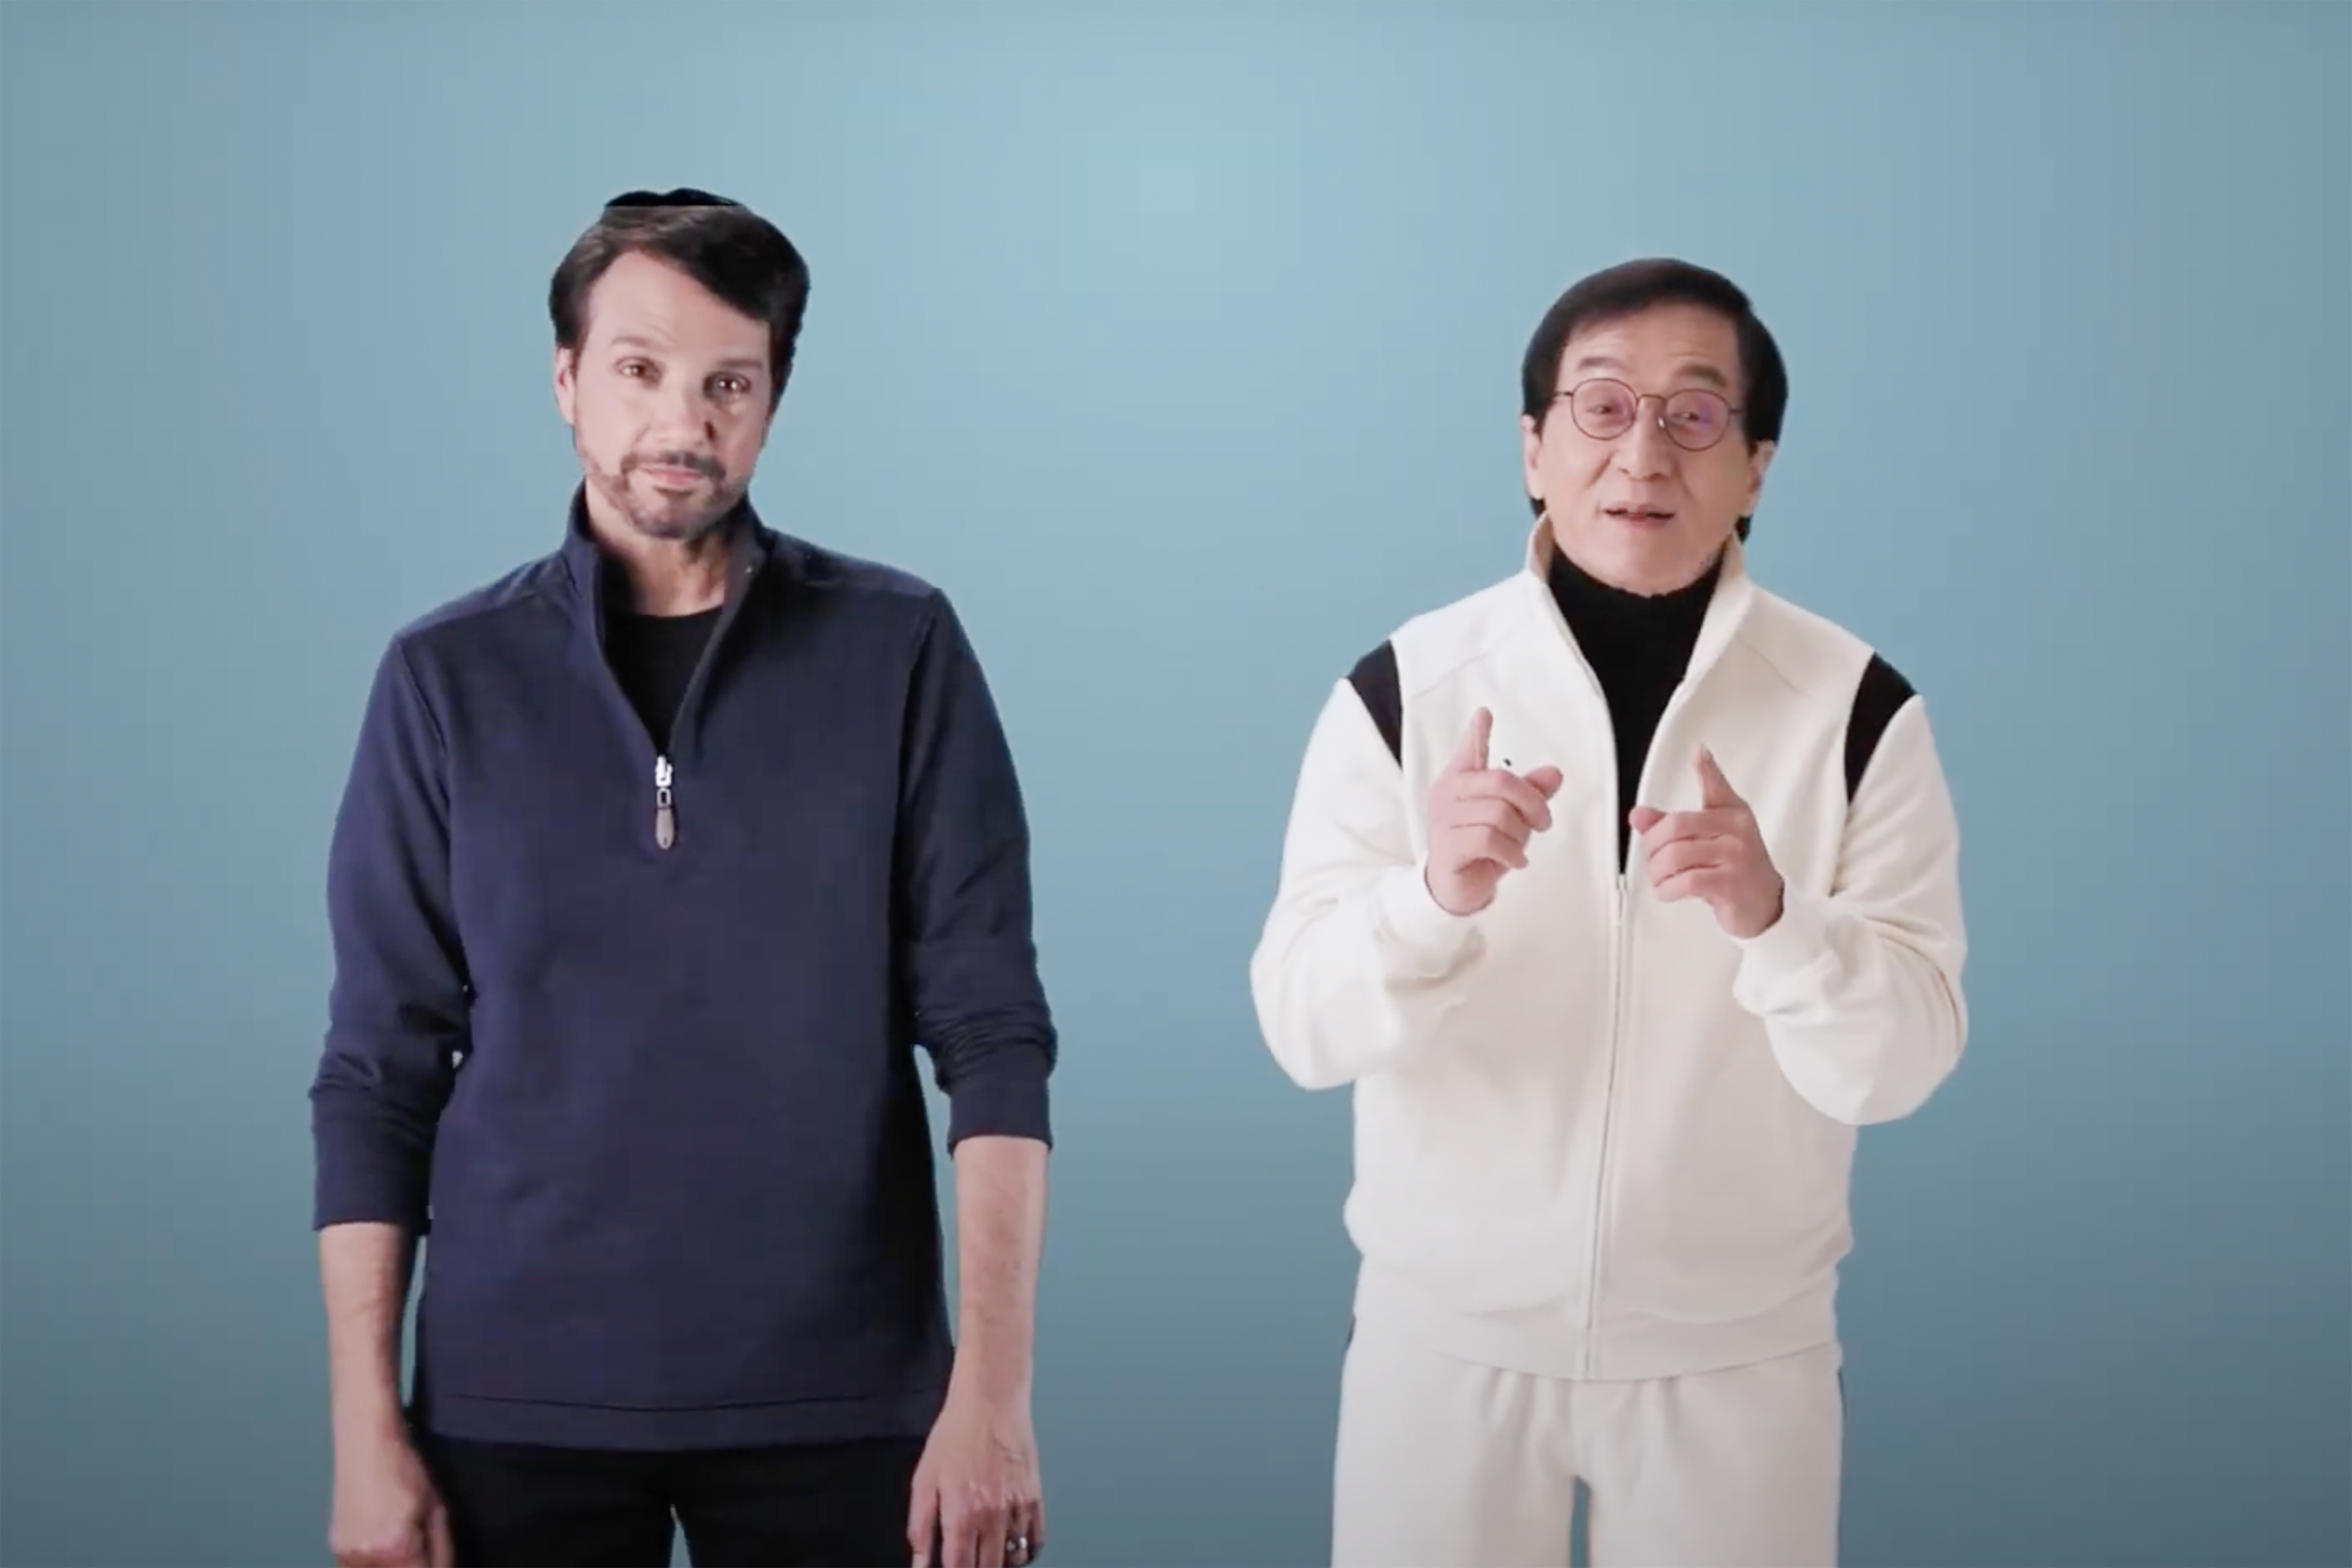 The ‘Karate Kid’ Returns: Jackie Chan and Ralph Macchio to Star in New Film